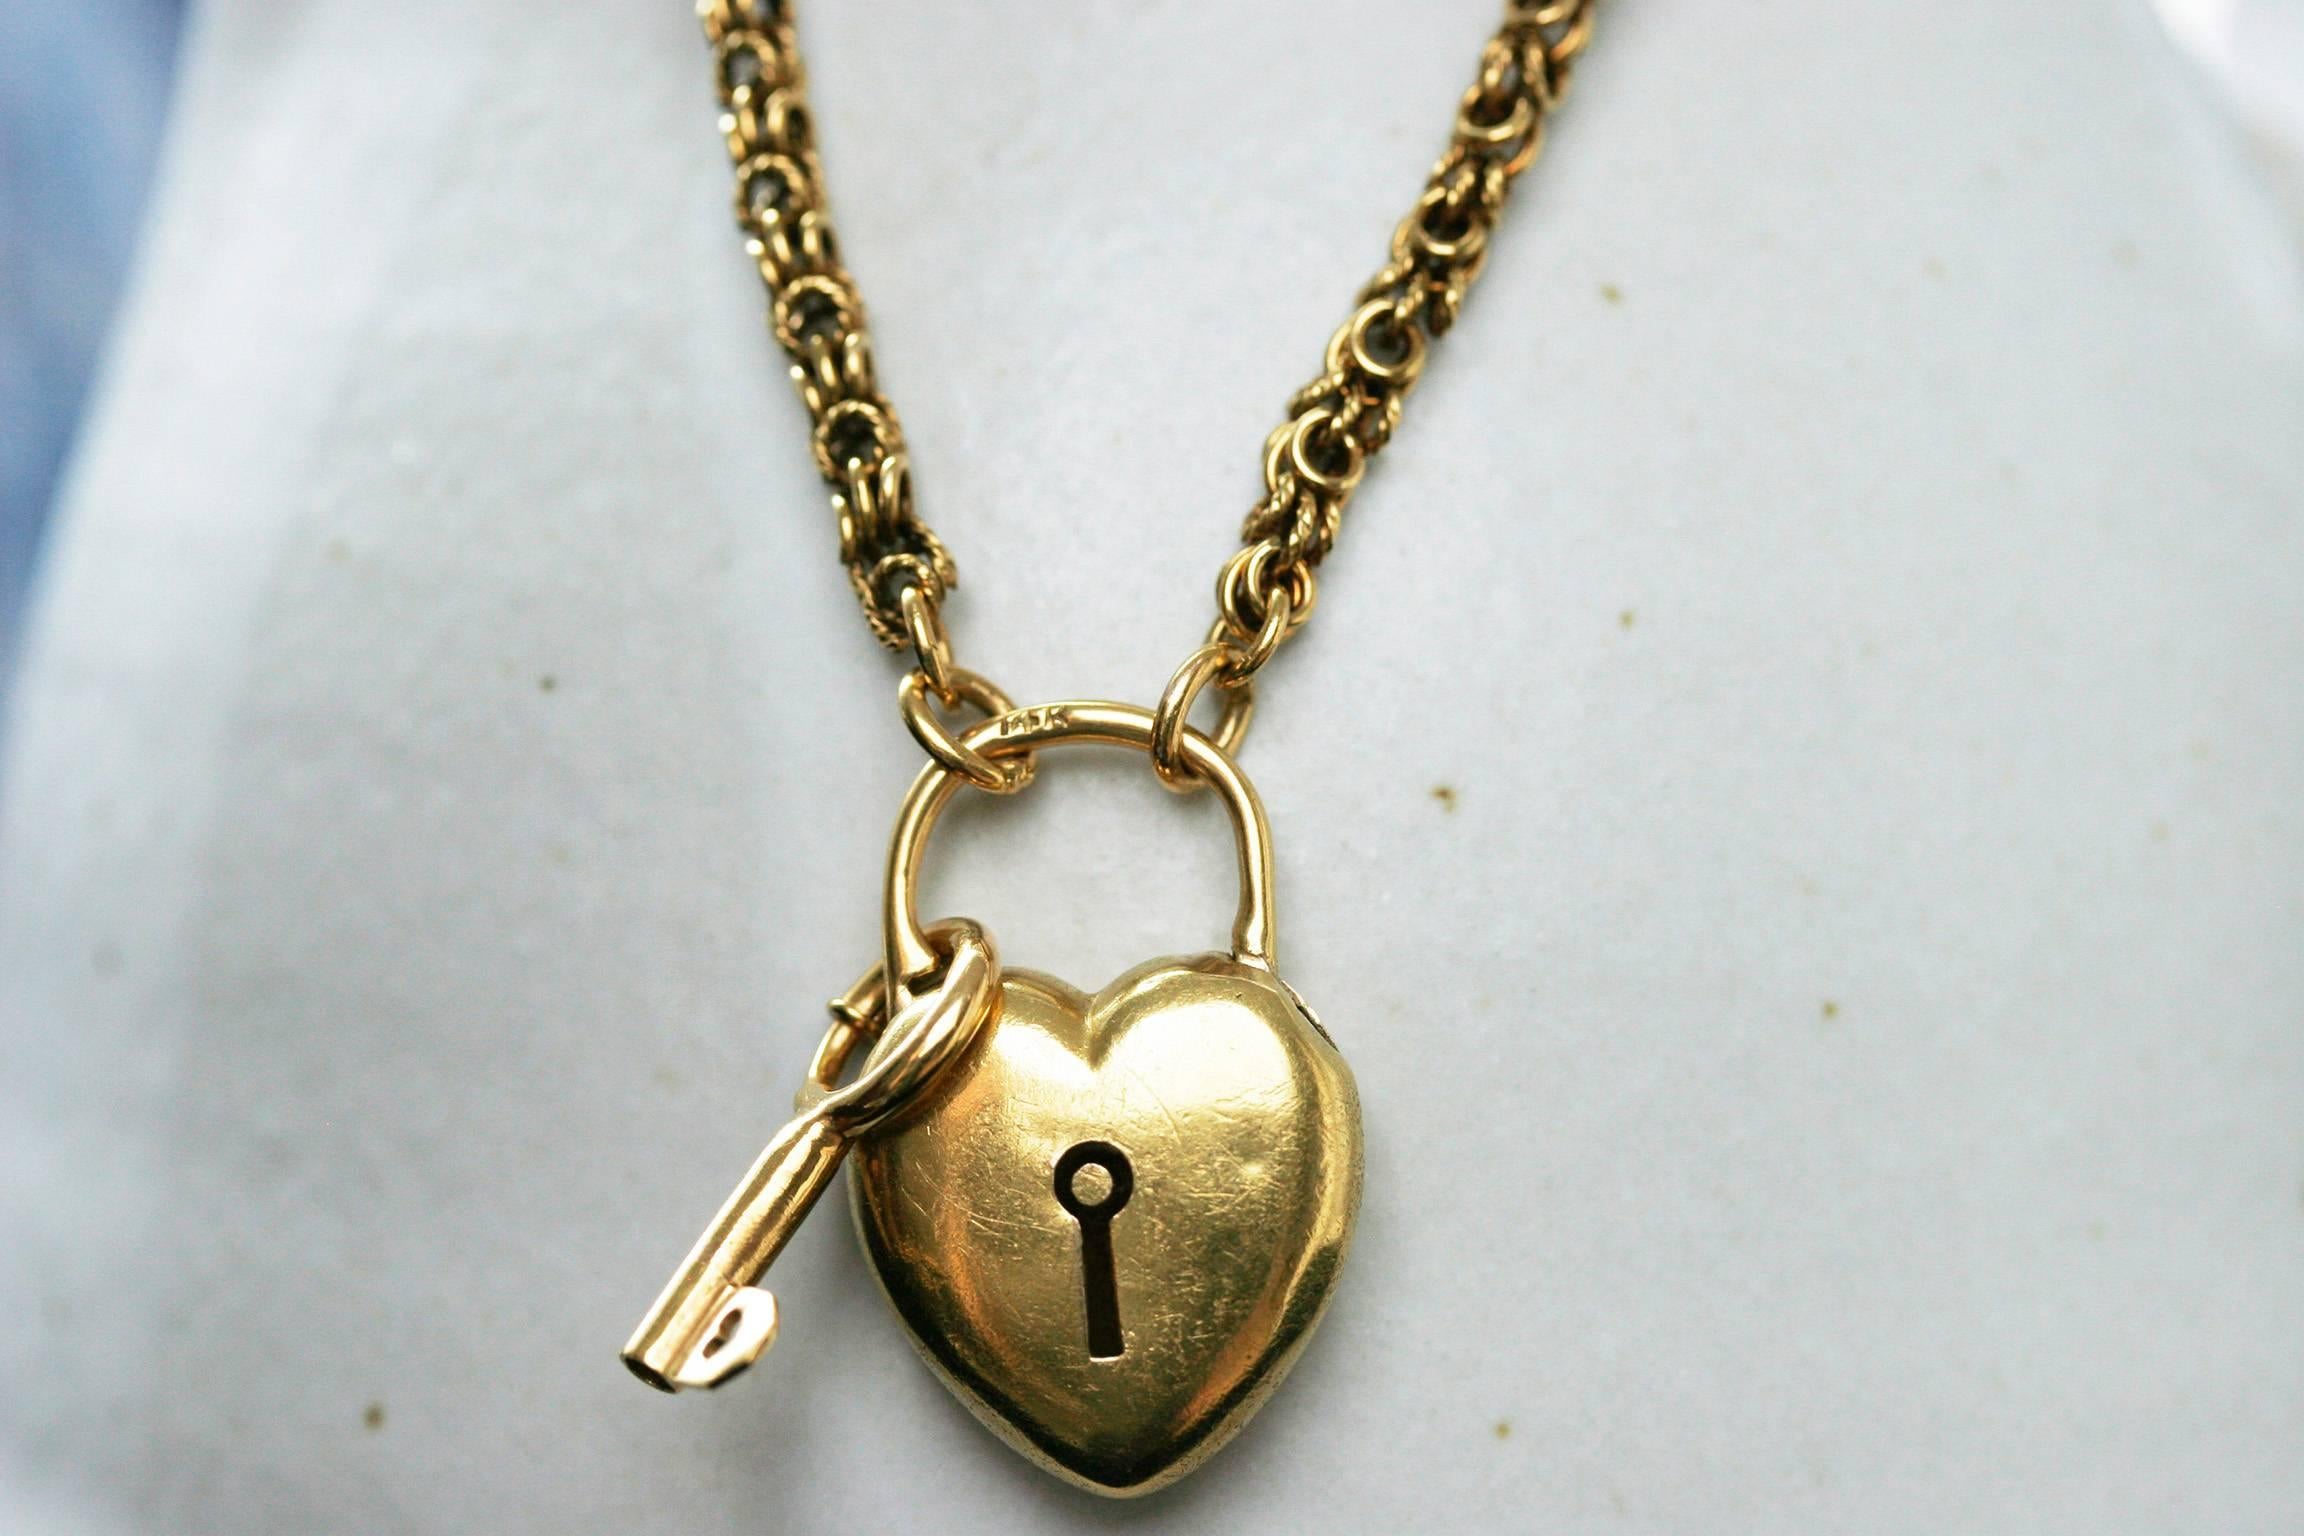 C.1870. Endearing Victorian heart padlock necklace. The padlock and the key are attached to a beautiful 14k rich yellow gold Victorian chain. The padlock is also crafted out of 14k yellow gold (hallmarked). The key also has a lovely detail of